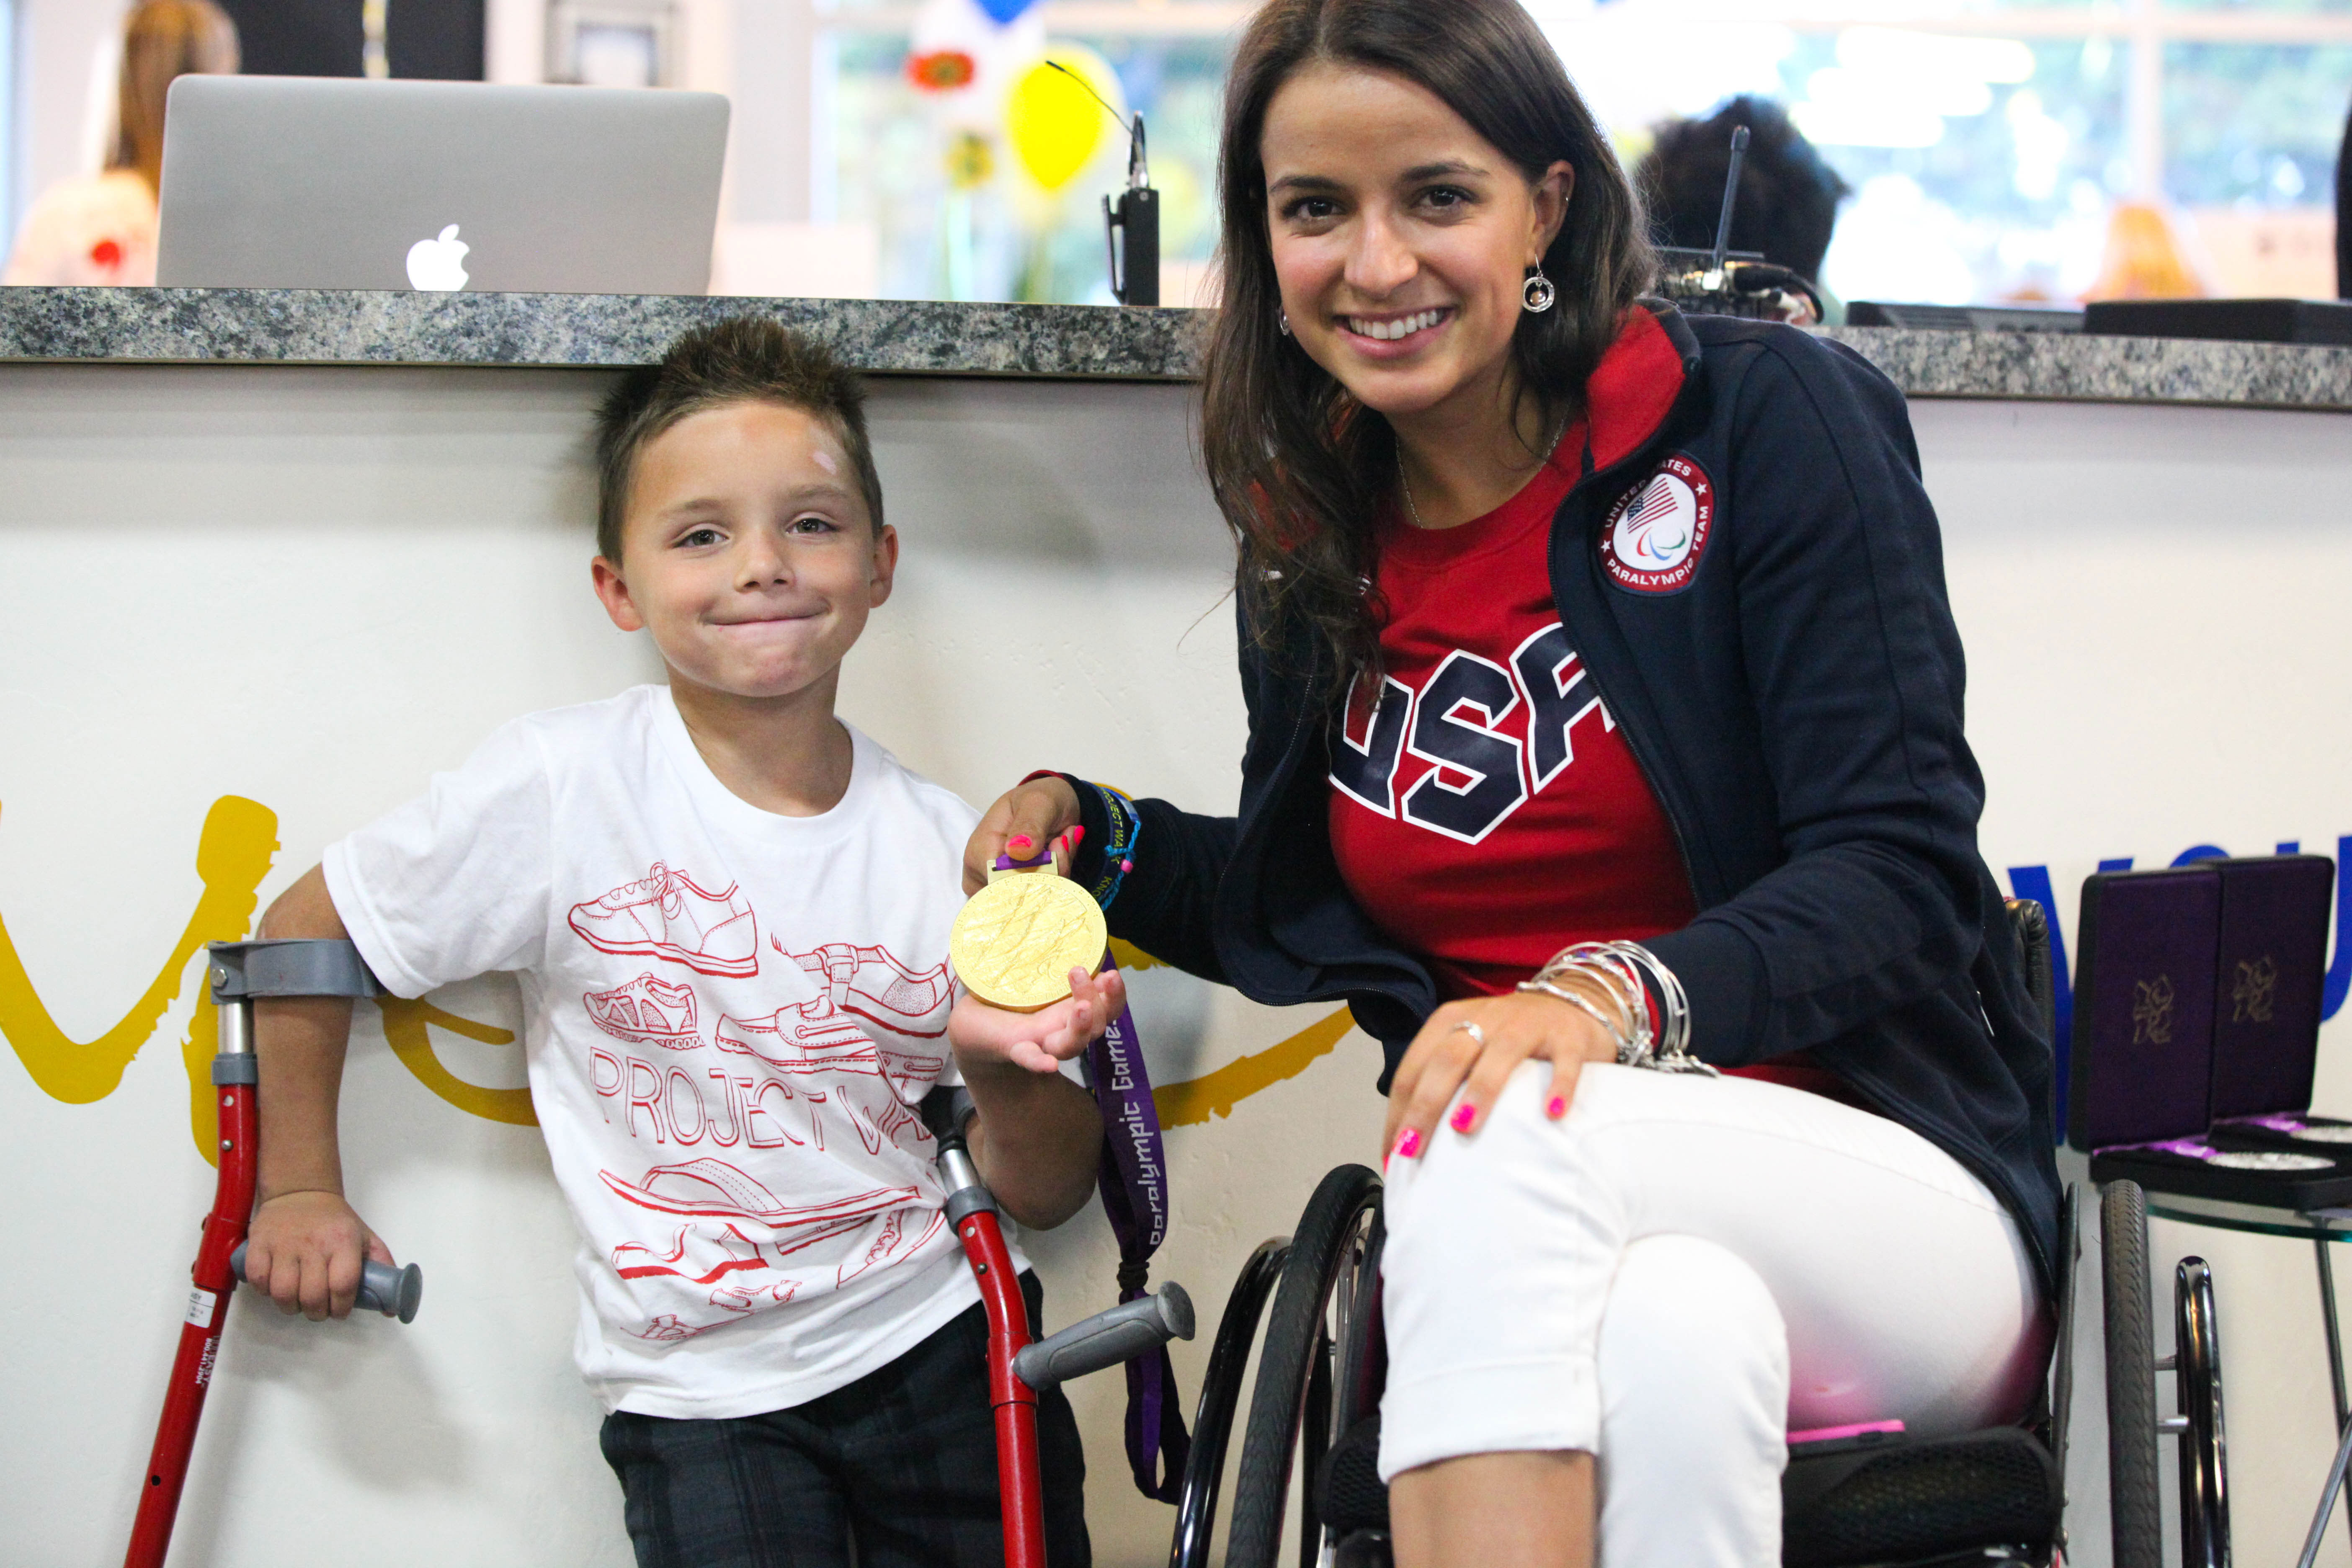 Gold Medalist and Paralympian, Victoria Arlen takes time to greet Project Walk client, Jonathan Williams (7) at the 9th Annual Steps to Recovery Event.